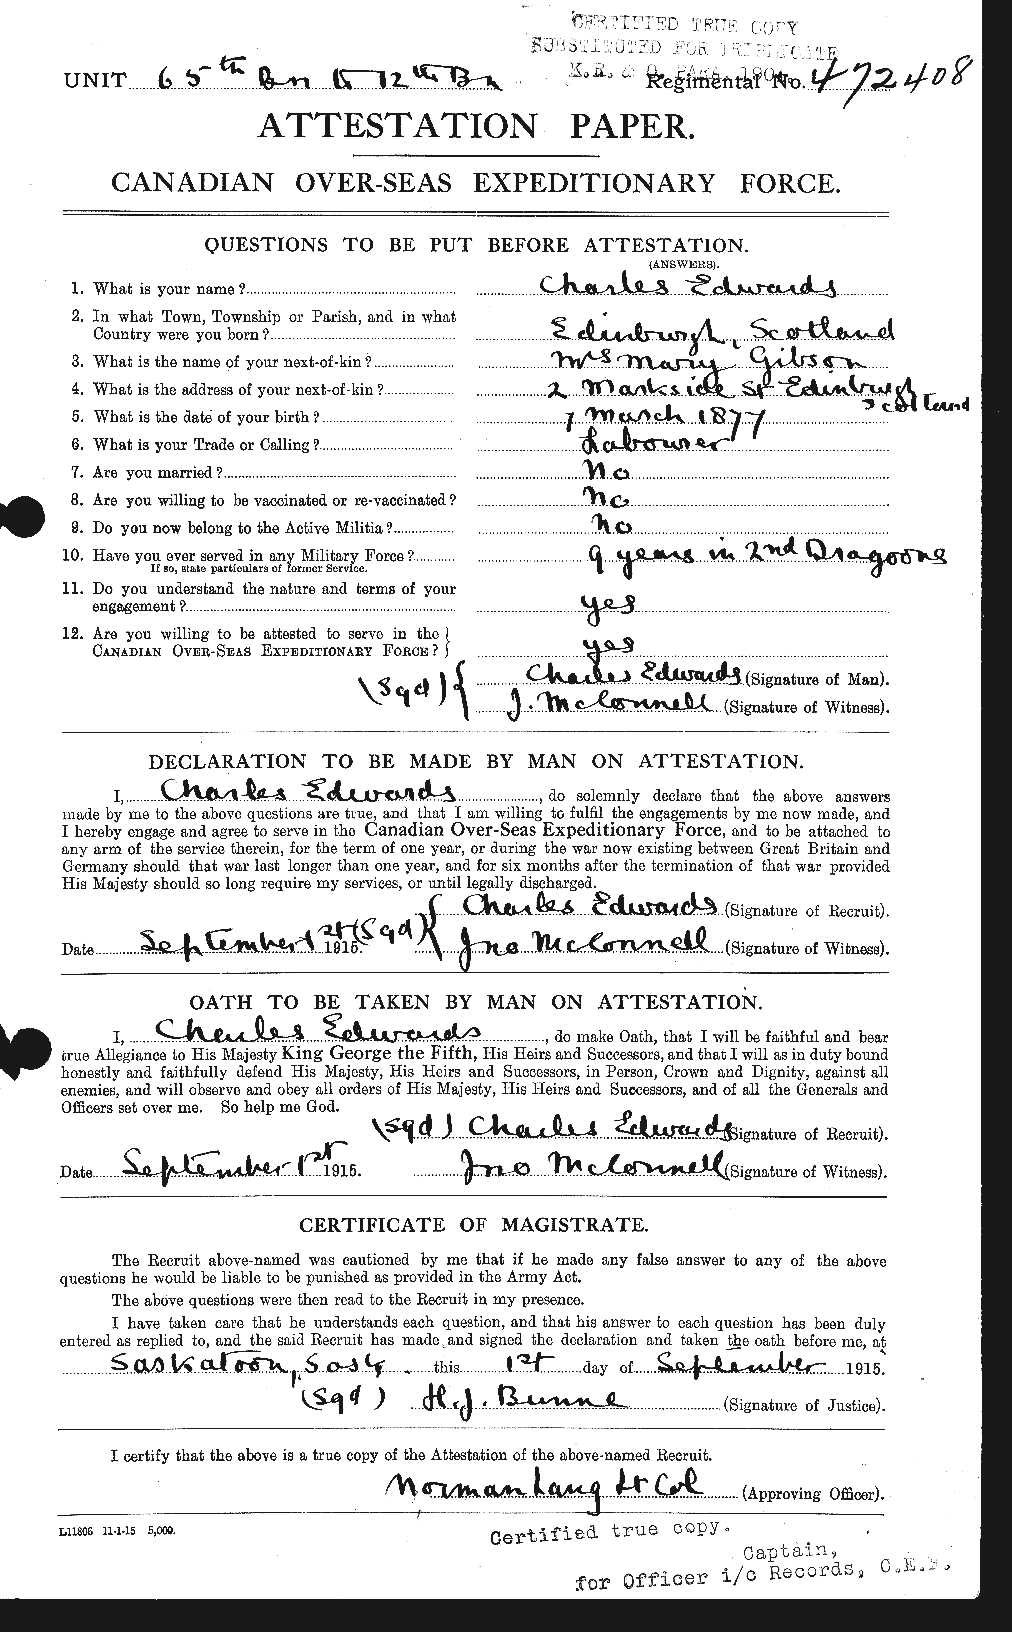 Personnel Records of the First World War - CEF 307831a